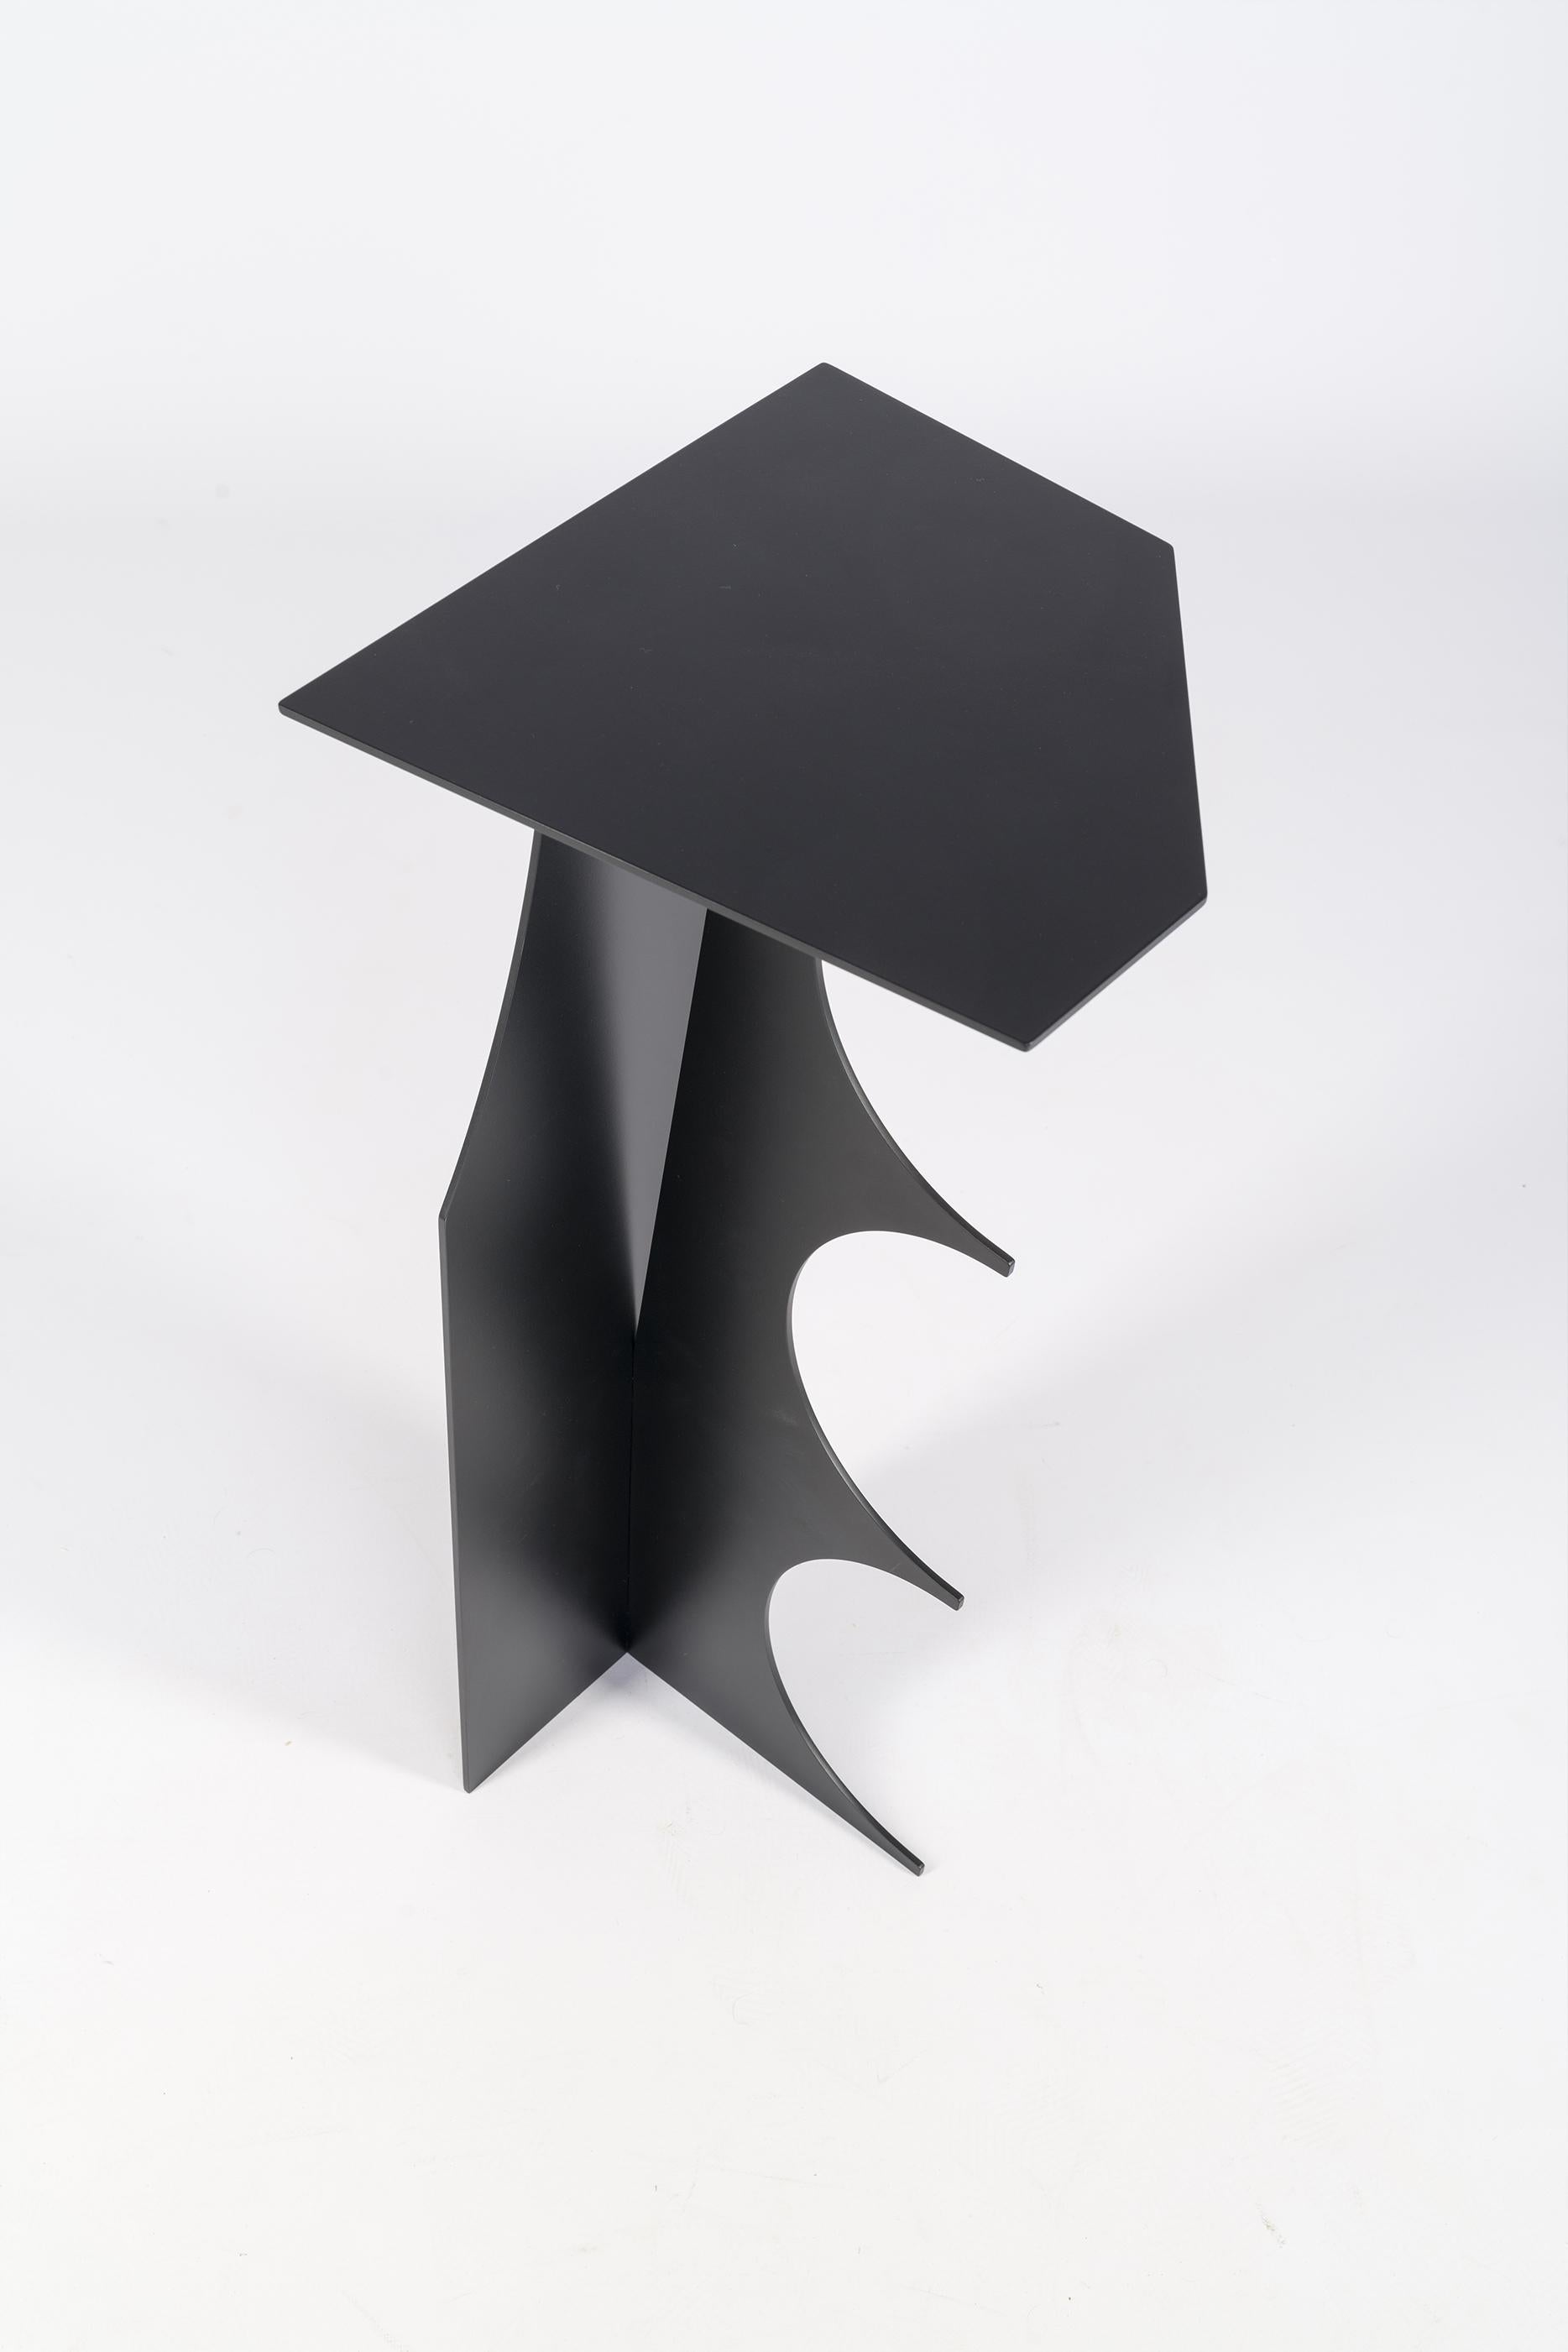 Italian Cutout T02, Contemporary Black Metal Side Table by Millim Studio For Sale